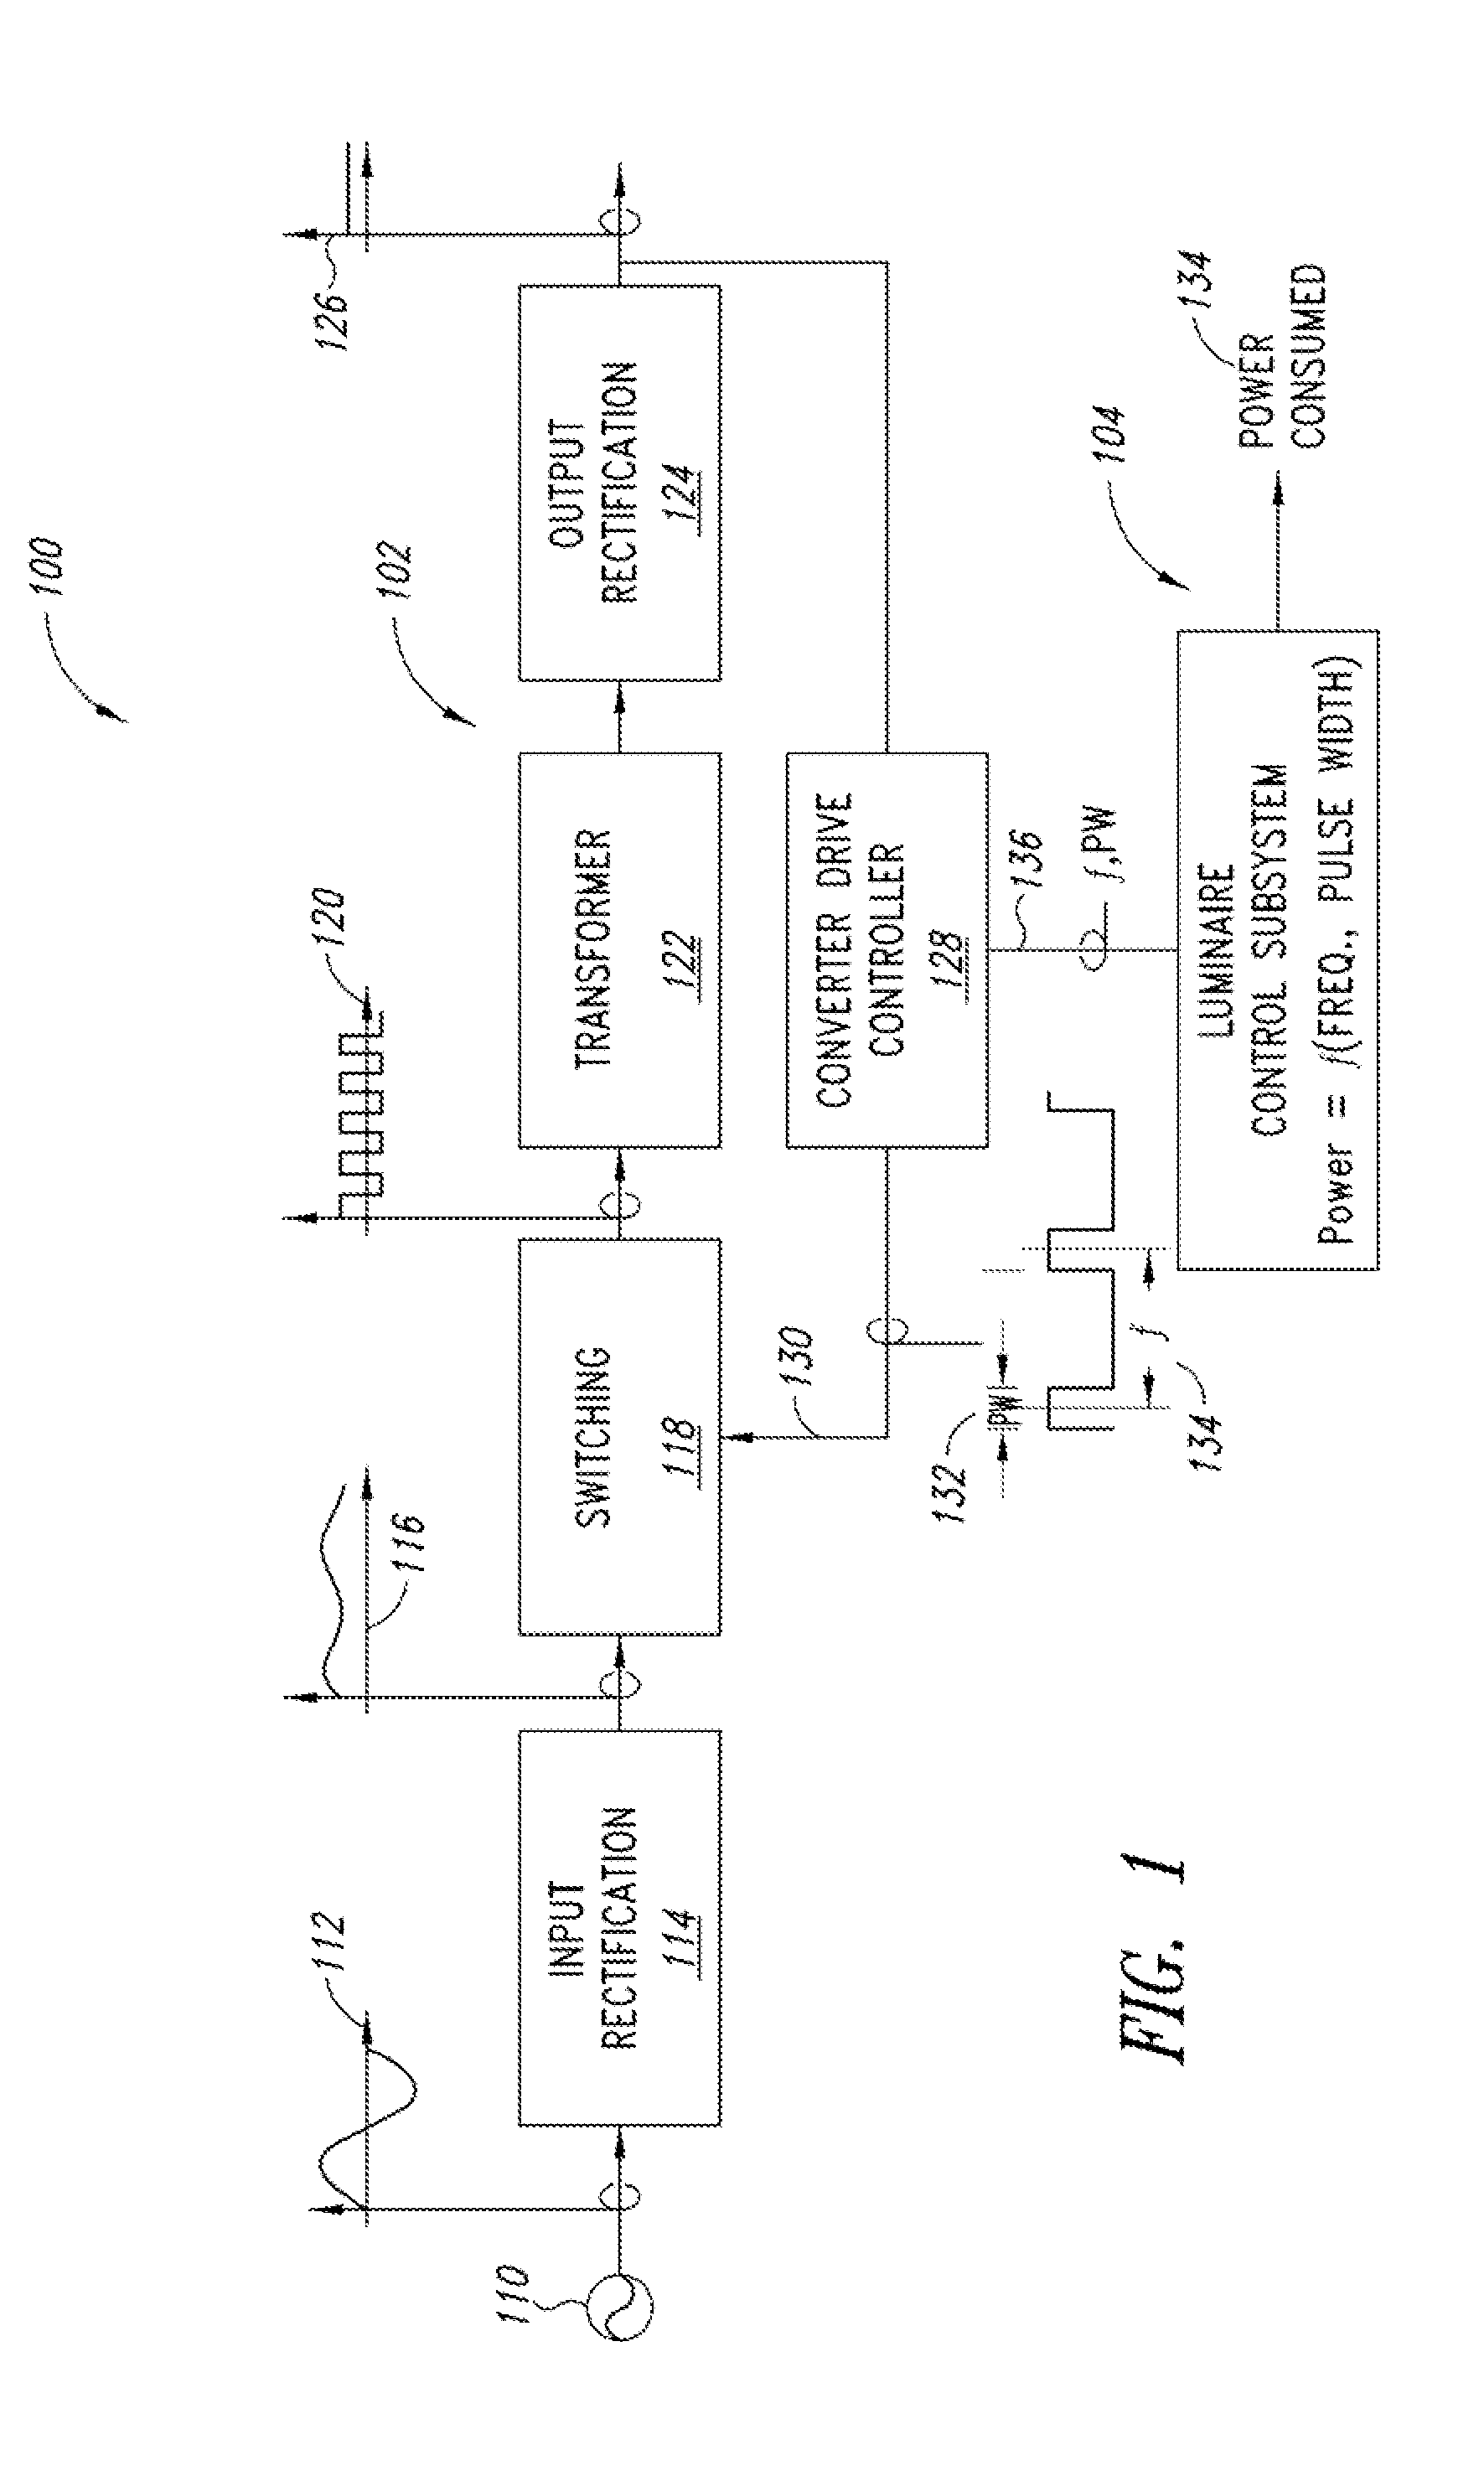 Luminaire with switch-mode converter power monitoring